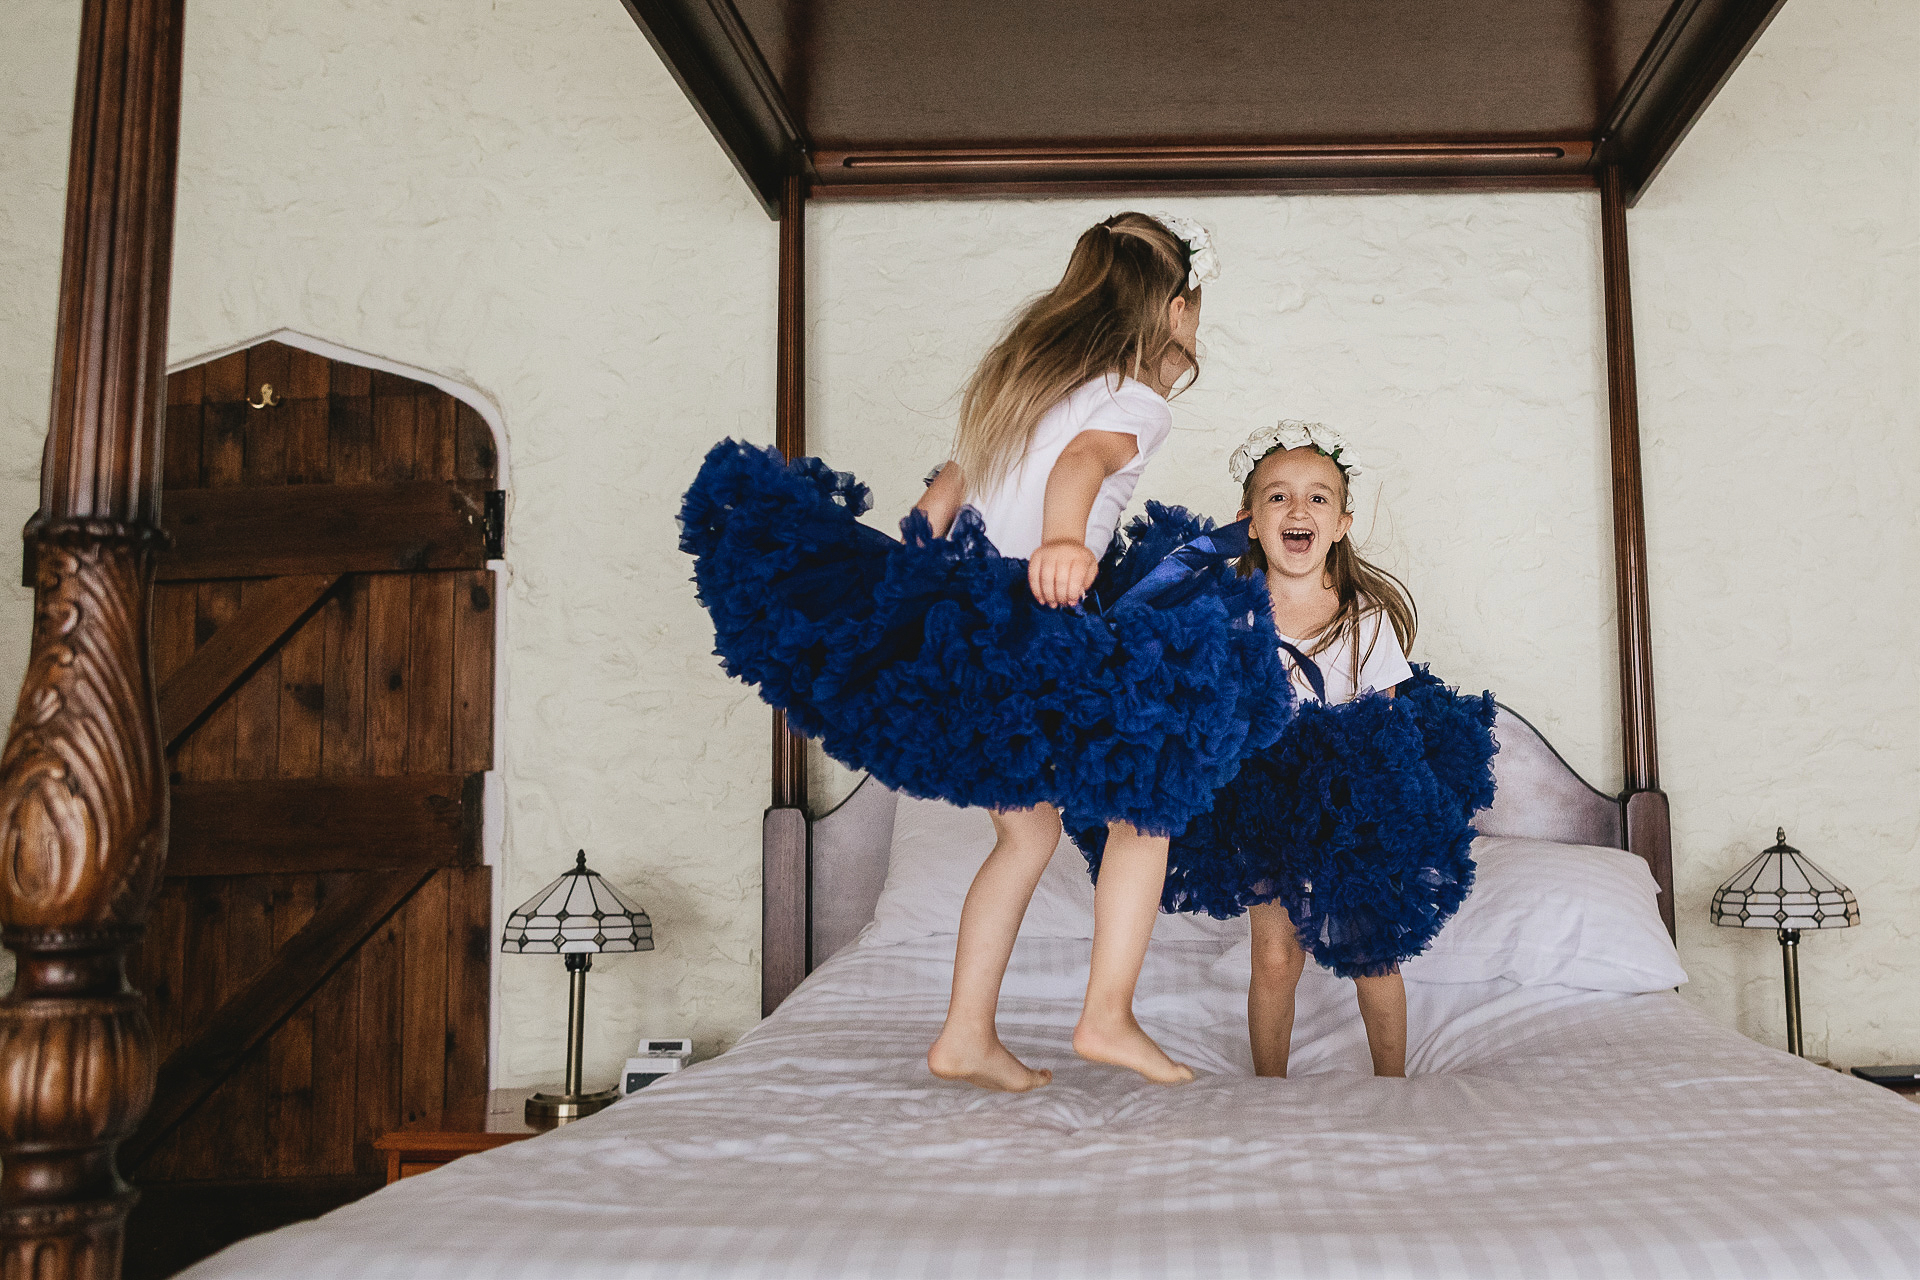 Flower girls in blue tutus bouncing on a four poster bed